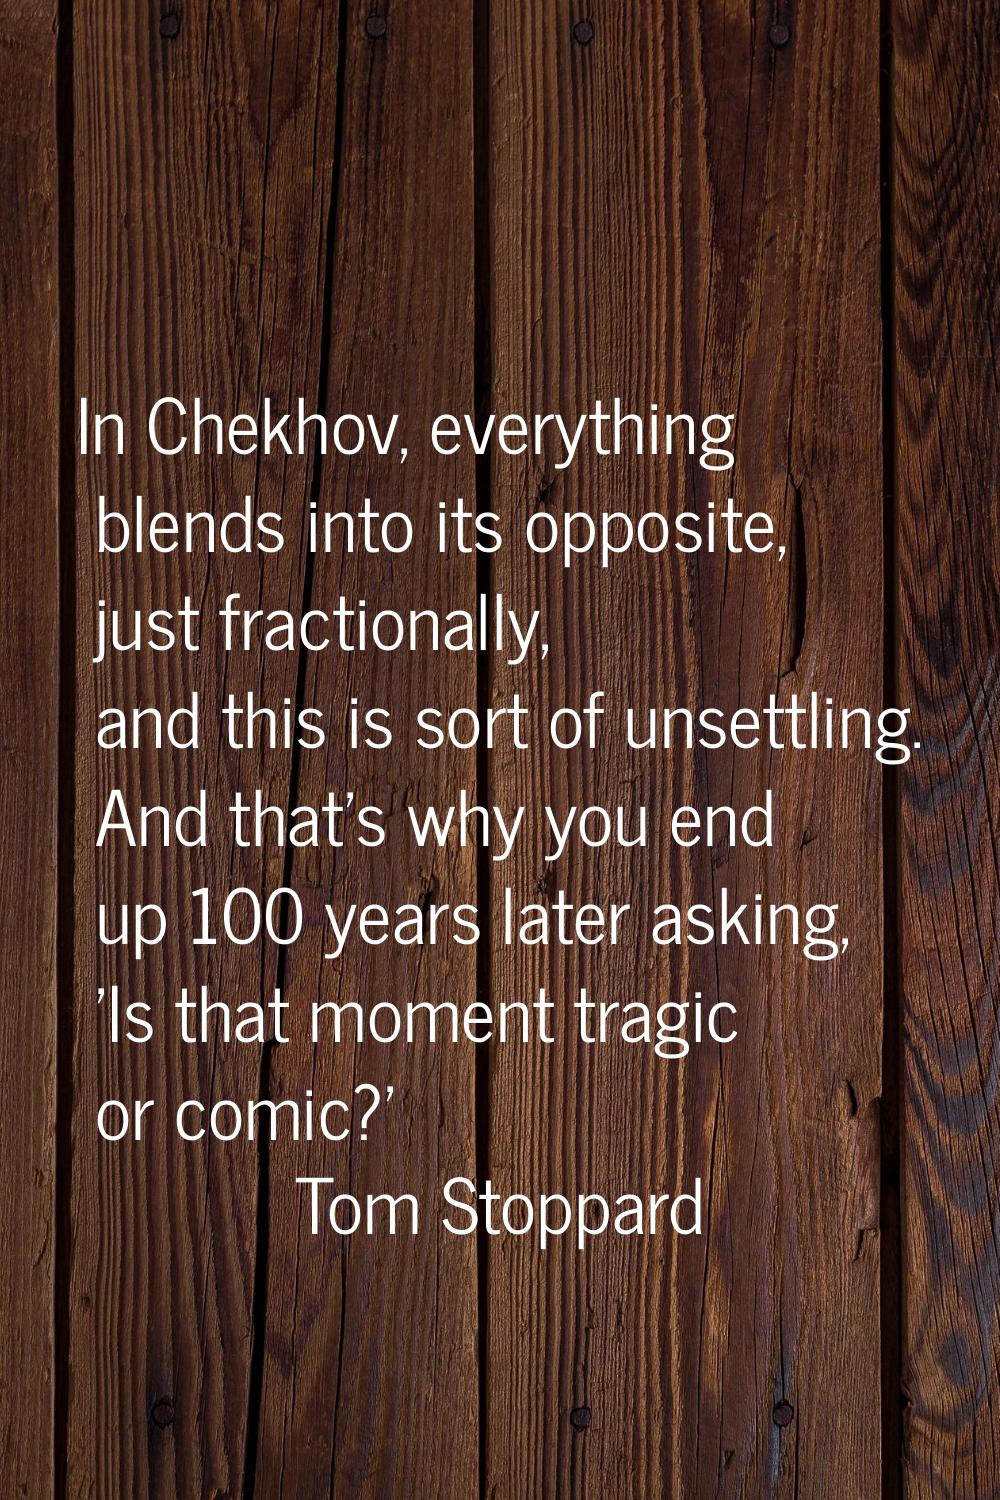 In Chekhov, everything blends into its opposite, just fractionally, and this is sort of unsettling.